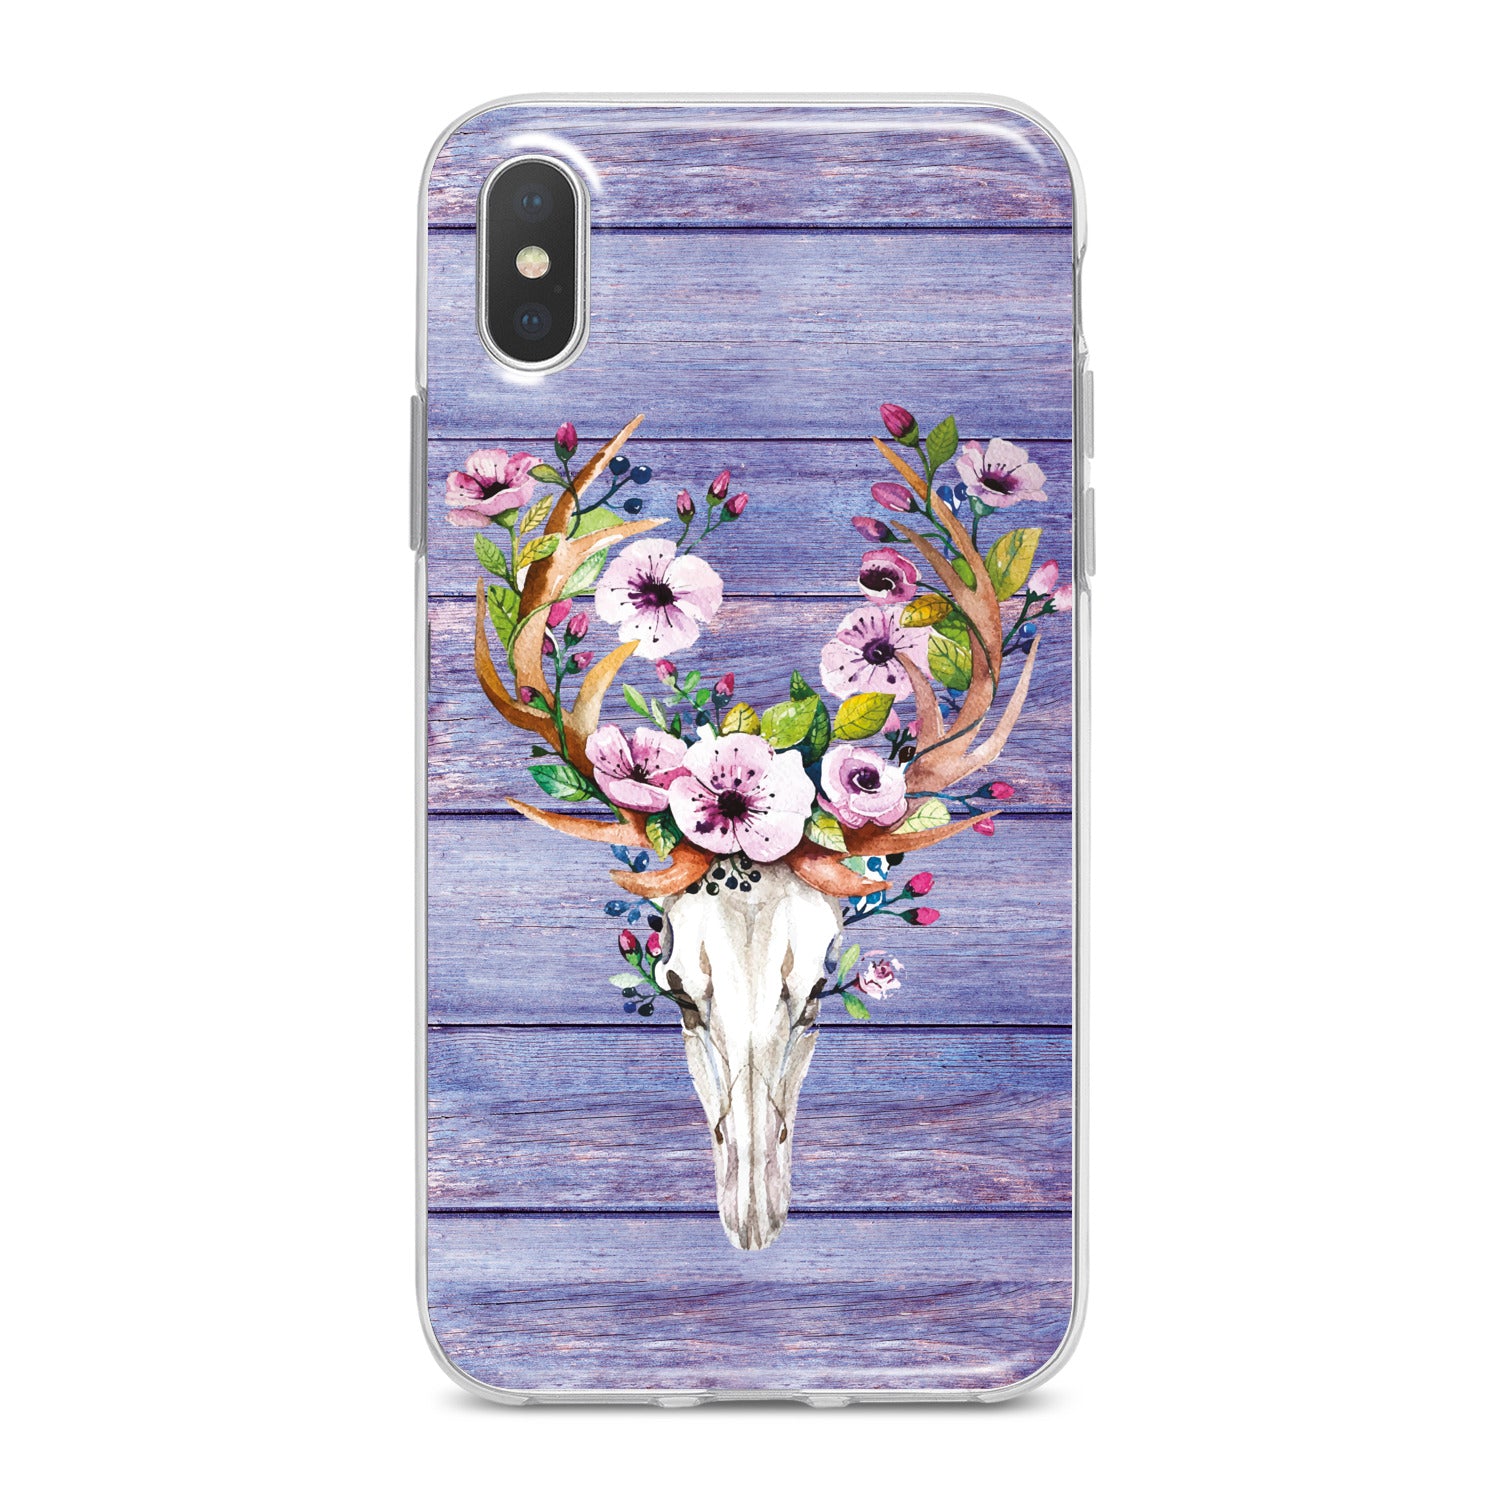 Lex Altern Floral Animal Skull Phone Case for your iPhone & Android phone.